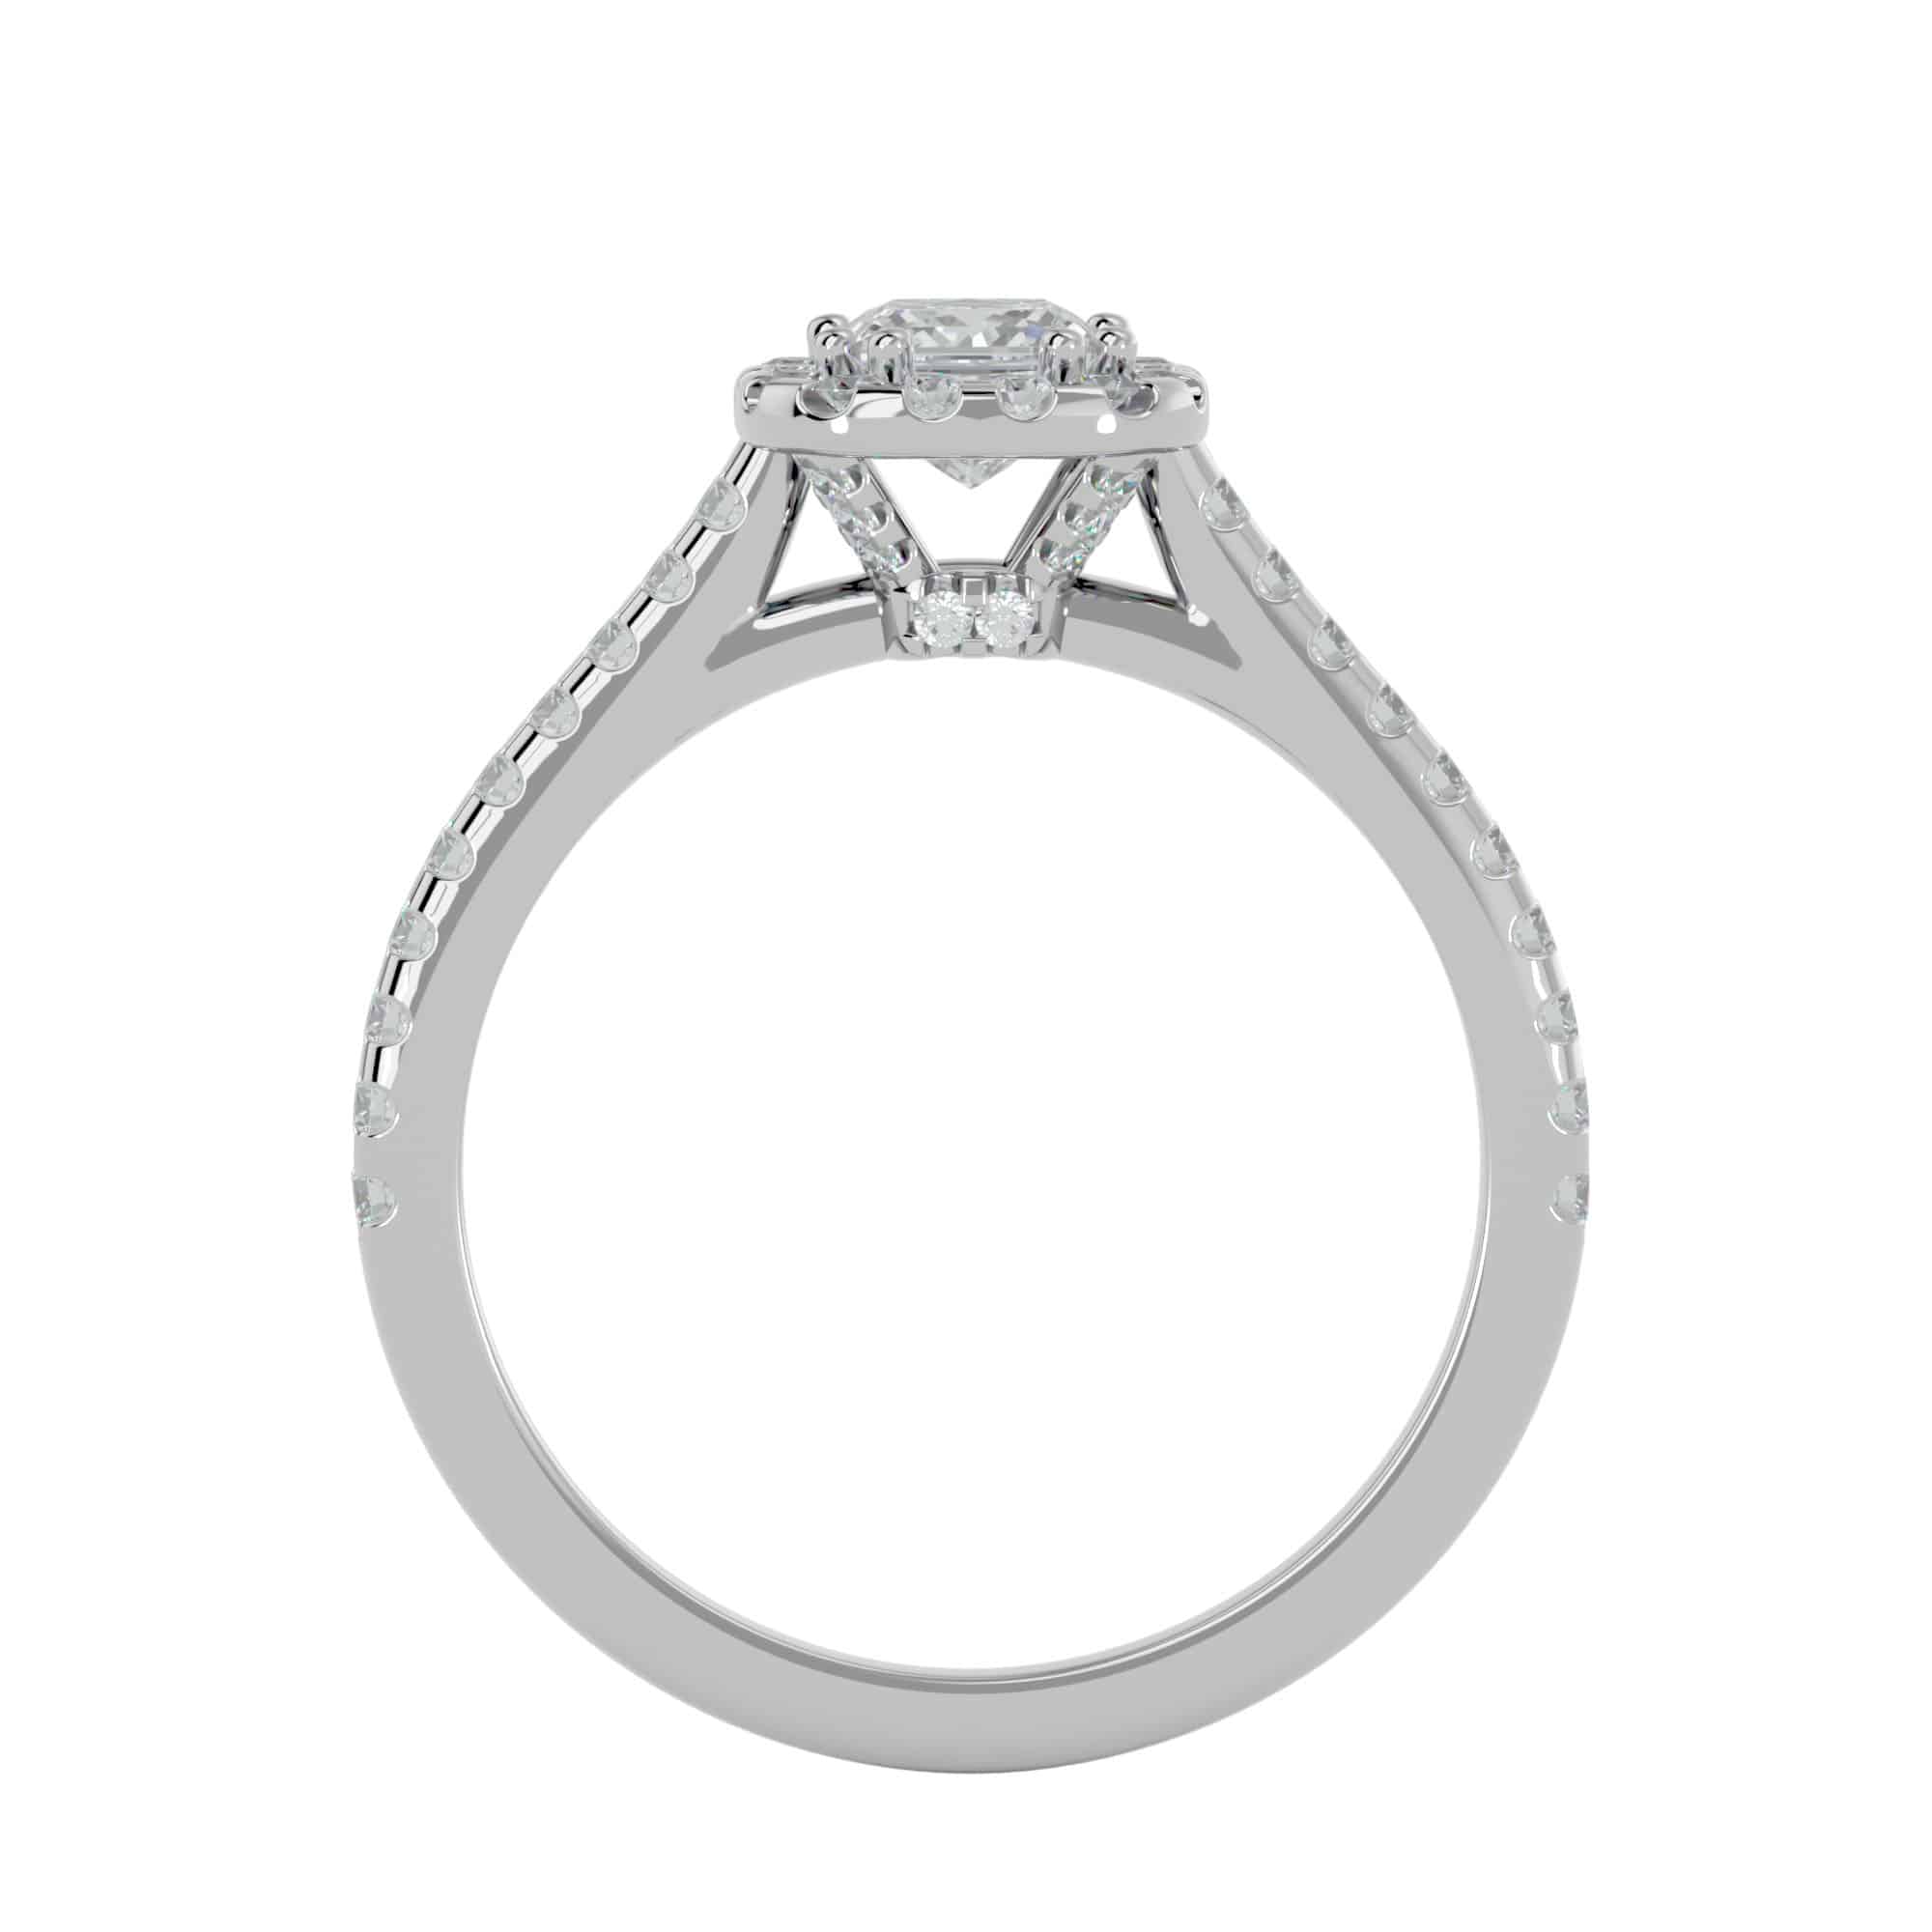 Lucy Princess Cut Halo Engagement Ring Cathedral Setting